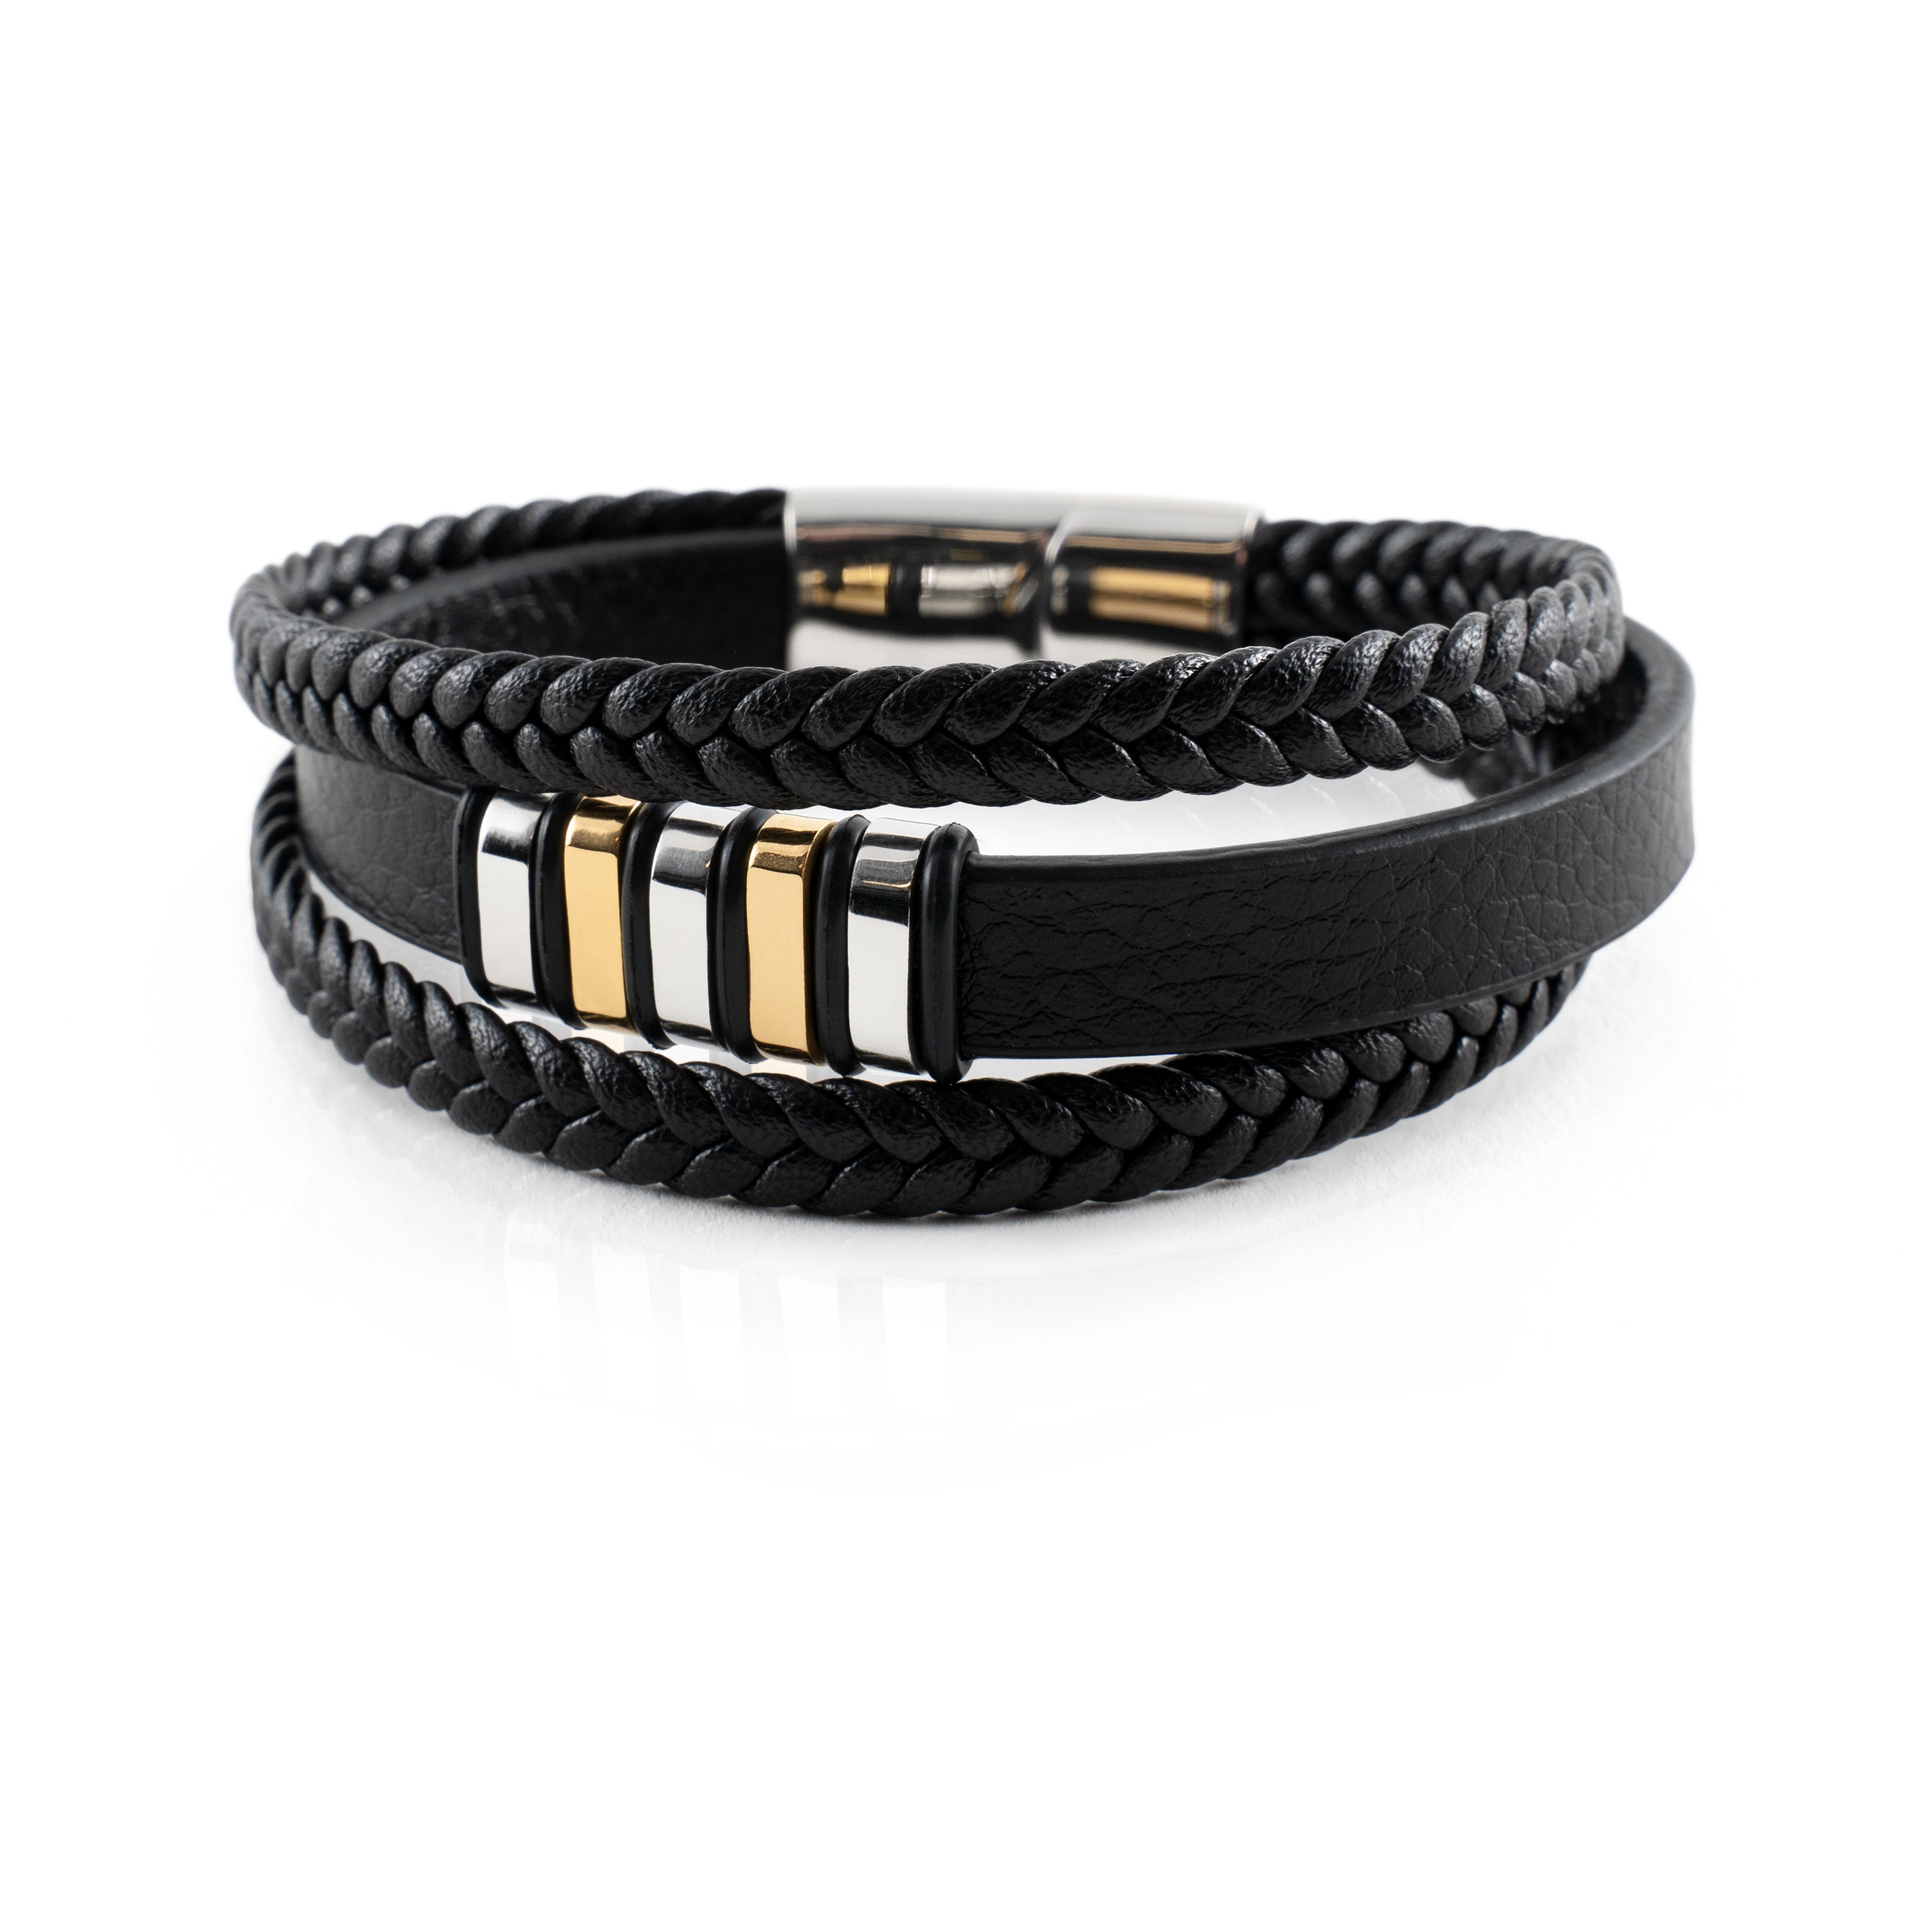 Vintage Wrap Black Men's Bracelet · Braided Leather & Stainless Steel + Gold · Jewelry Accessory Gift · 21 cm · Anwar